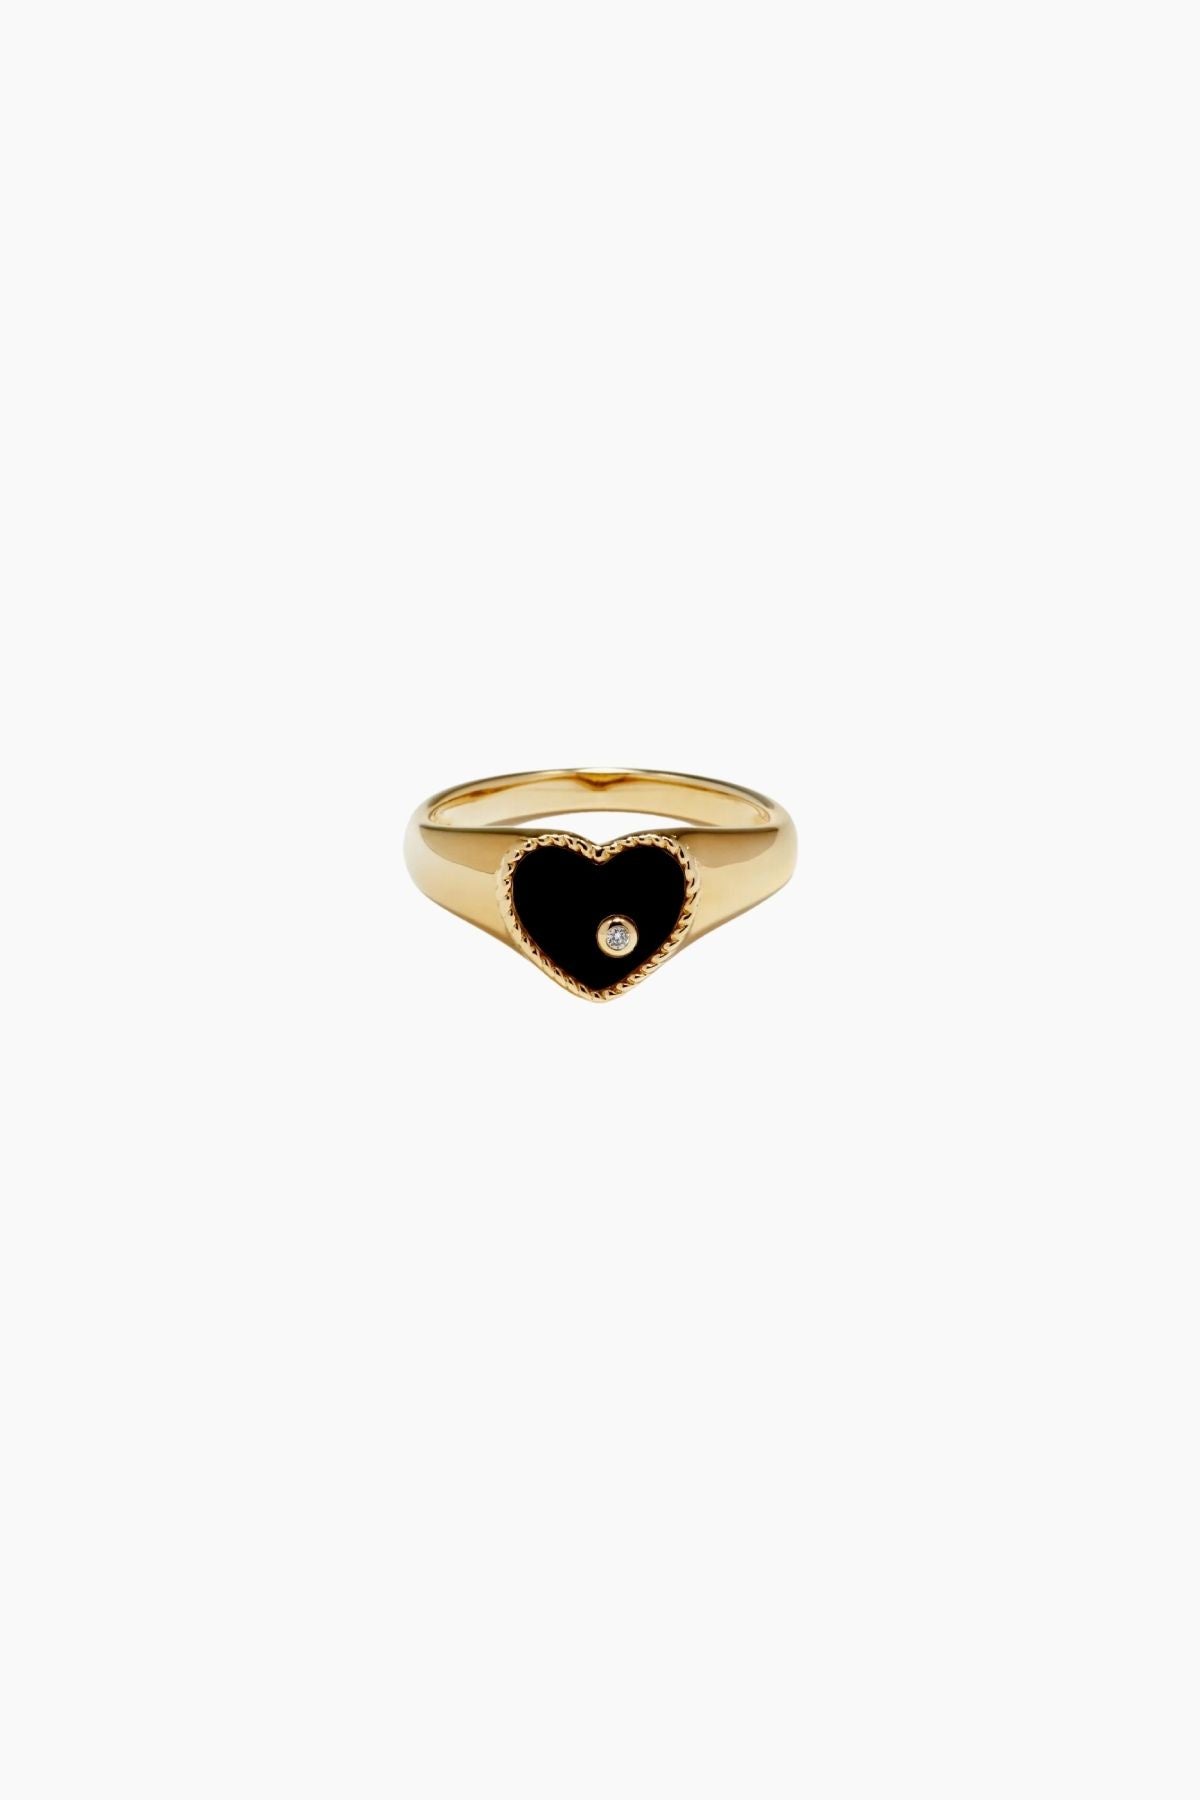 Yvonne Léon Baby Chevaliere Onyx Heart Ring - Yellow Gold